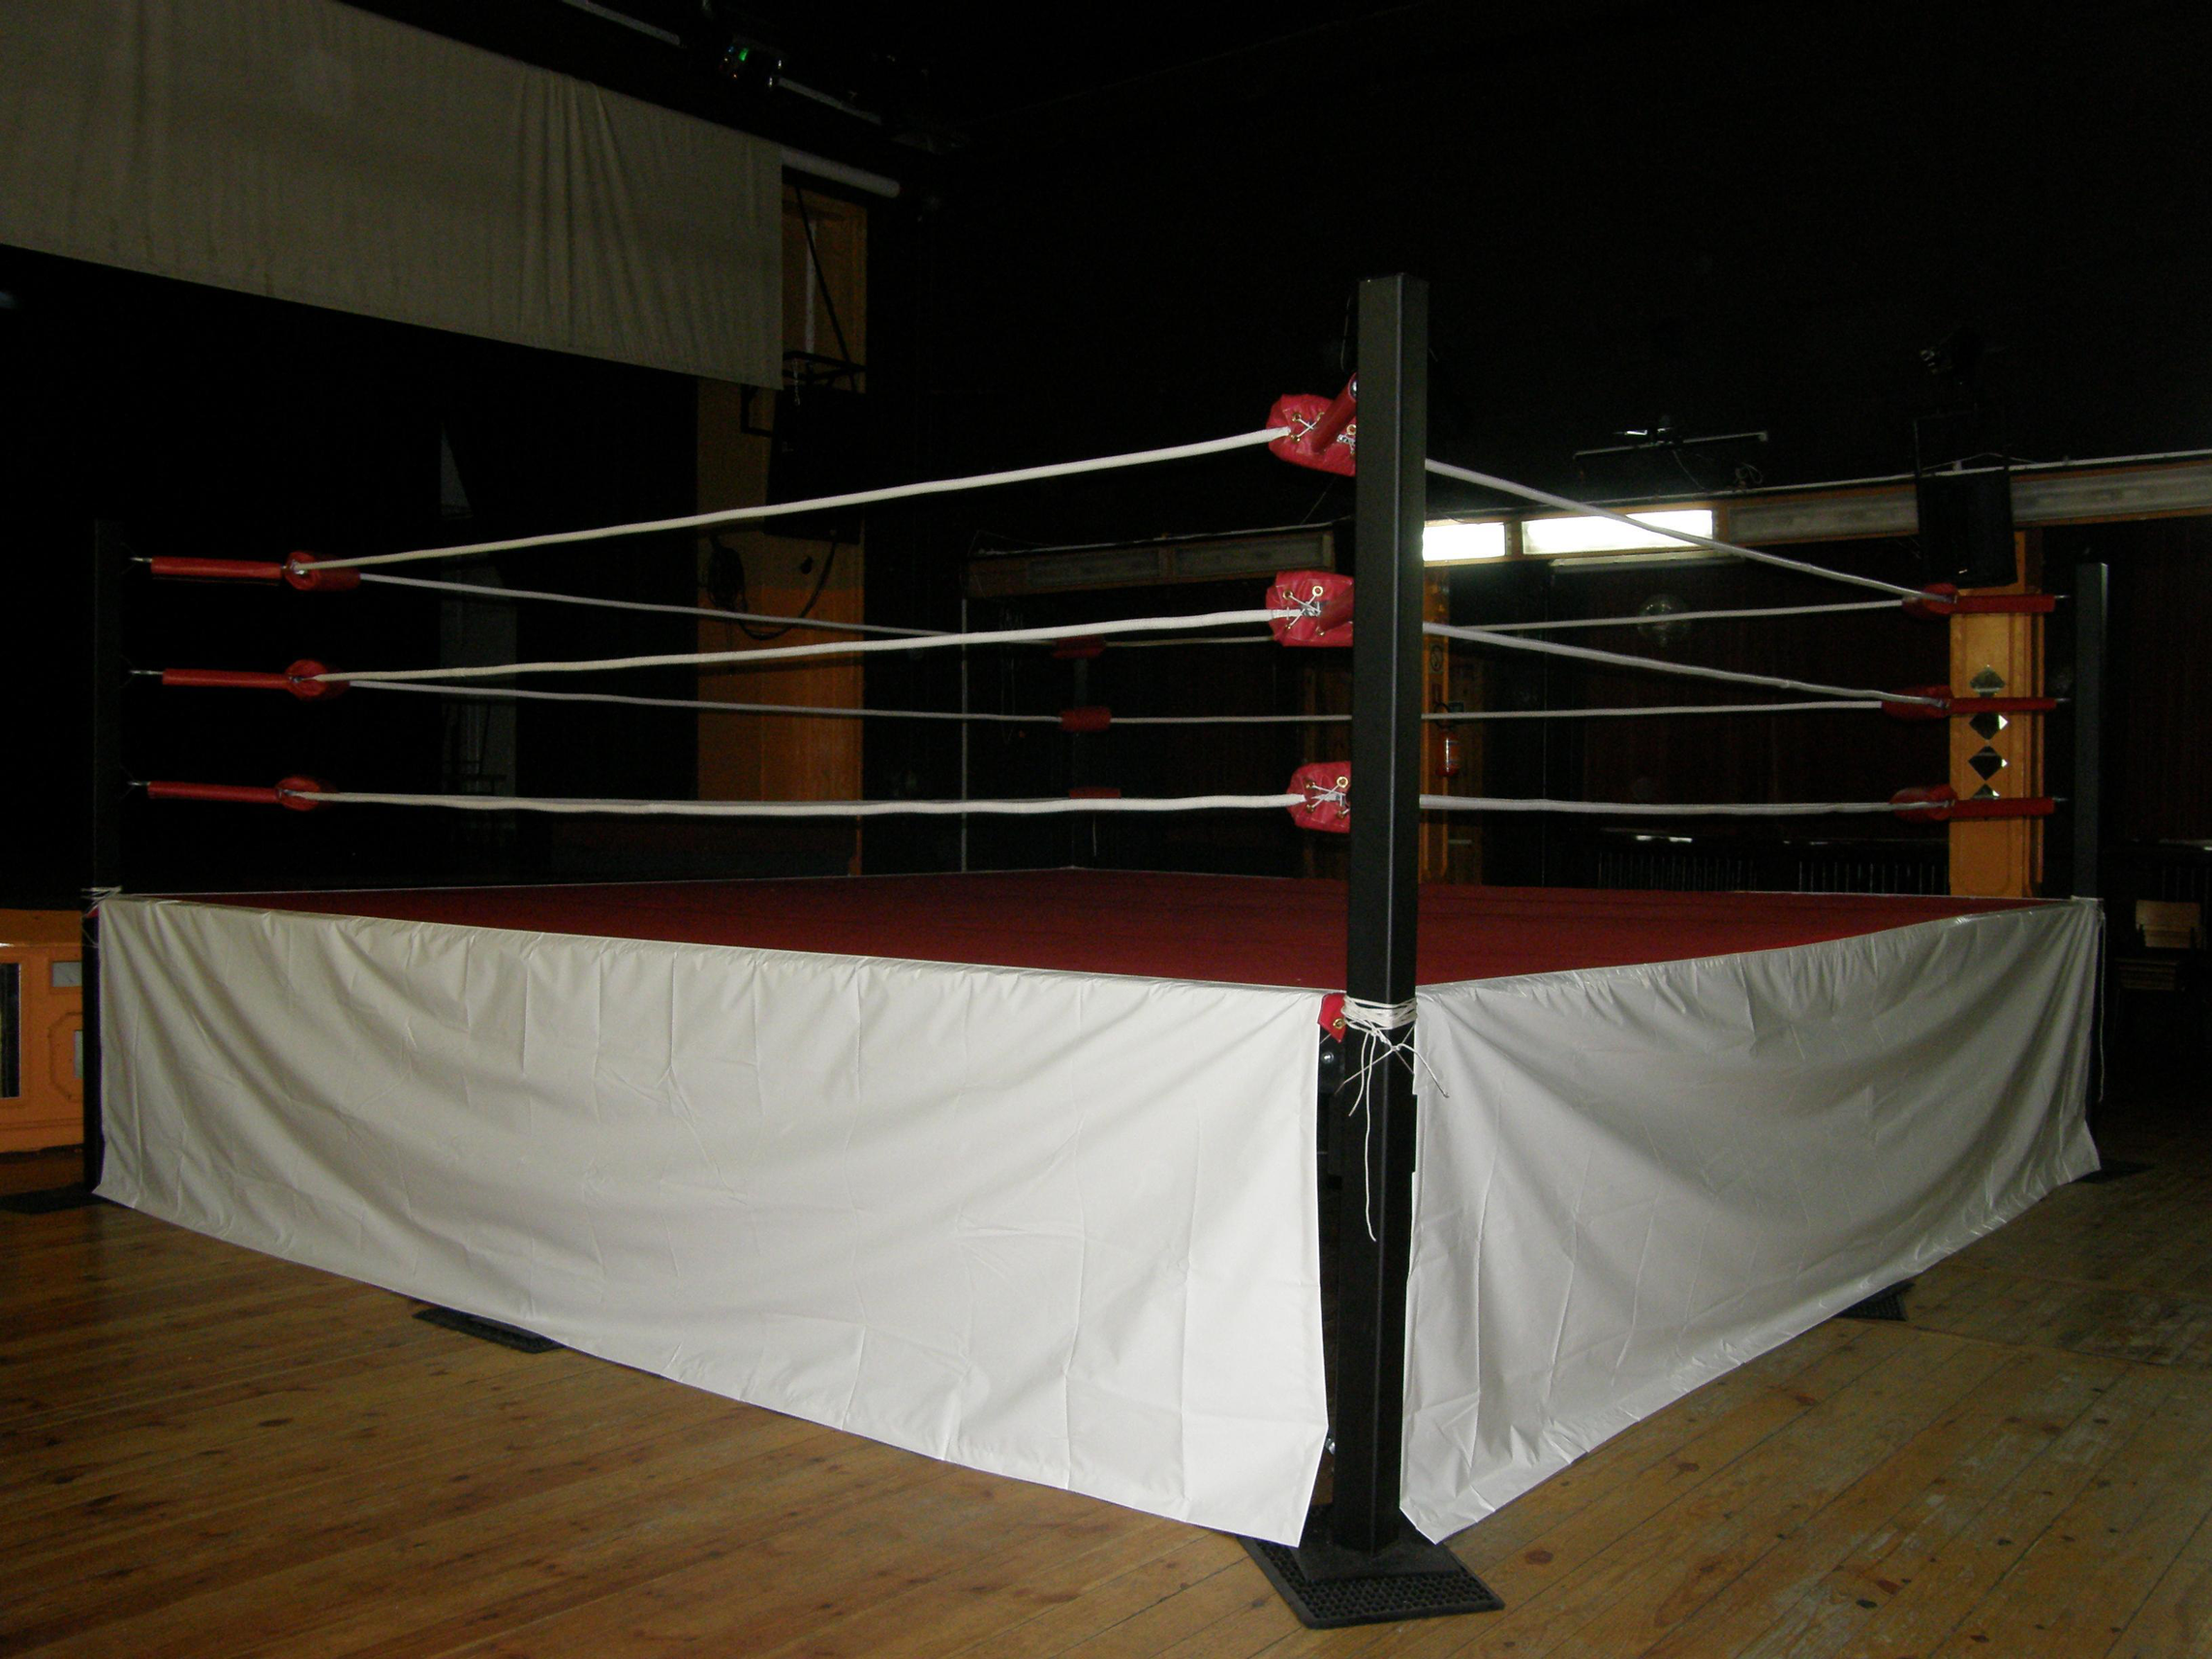 PROLAST Professional Boxing Ring Canvas Covers - Boxing Ring Rental